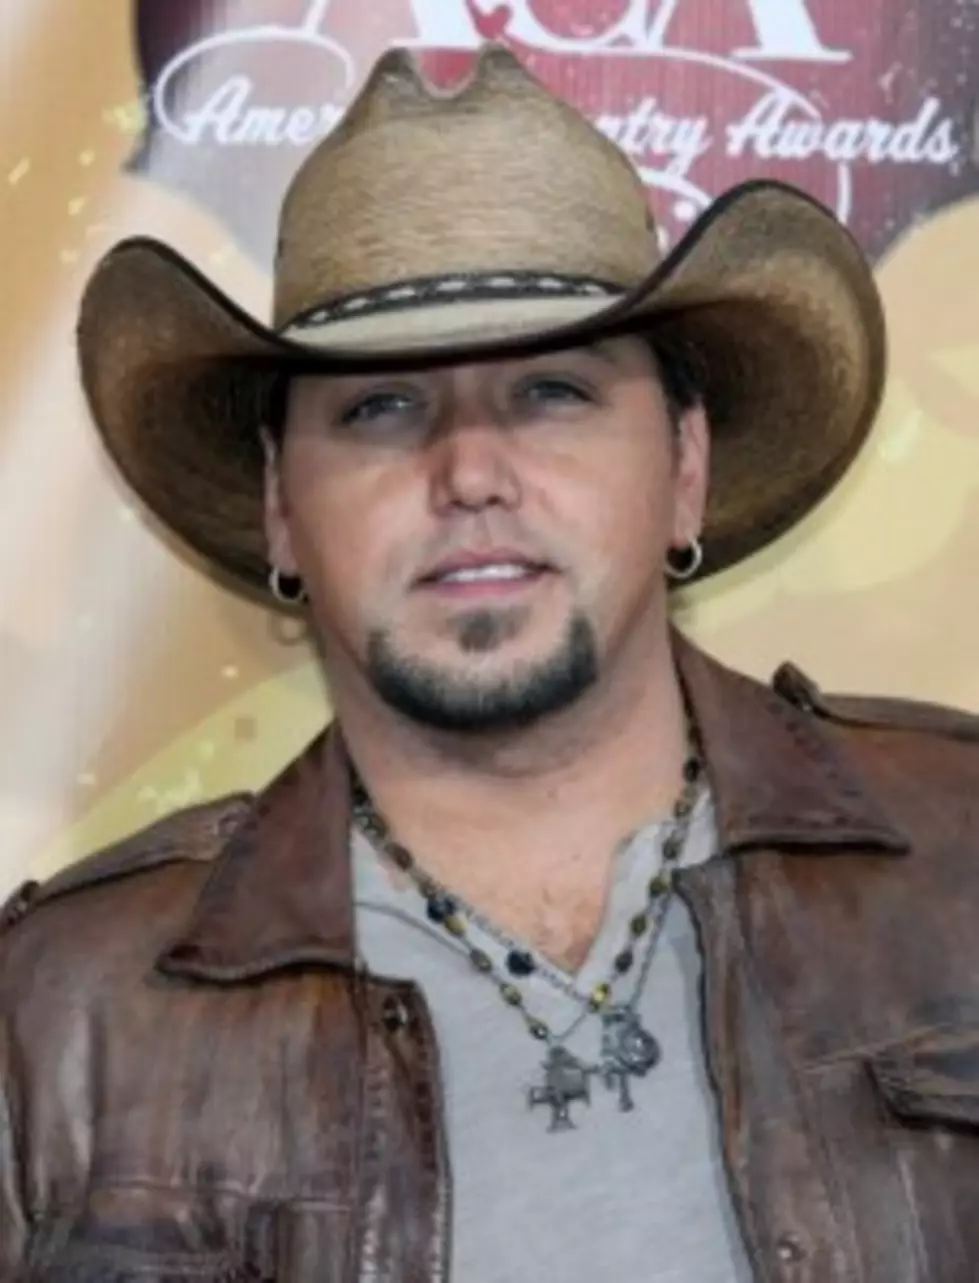 Jason Aldean, Carrie Underwood, Garth Brooks &#8211; Today In Country Music History